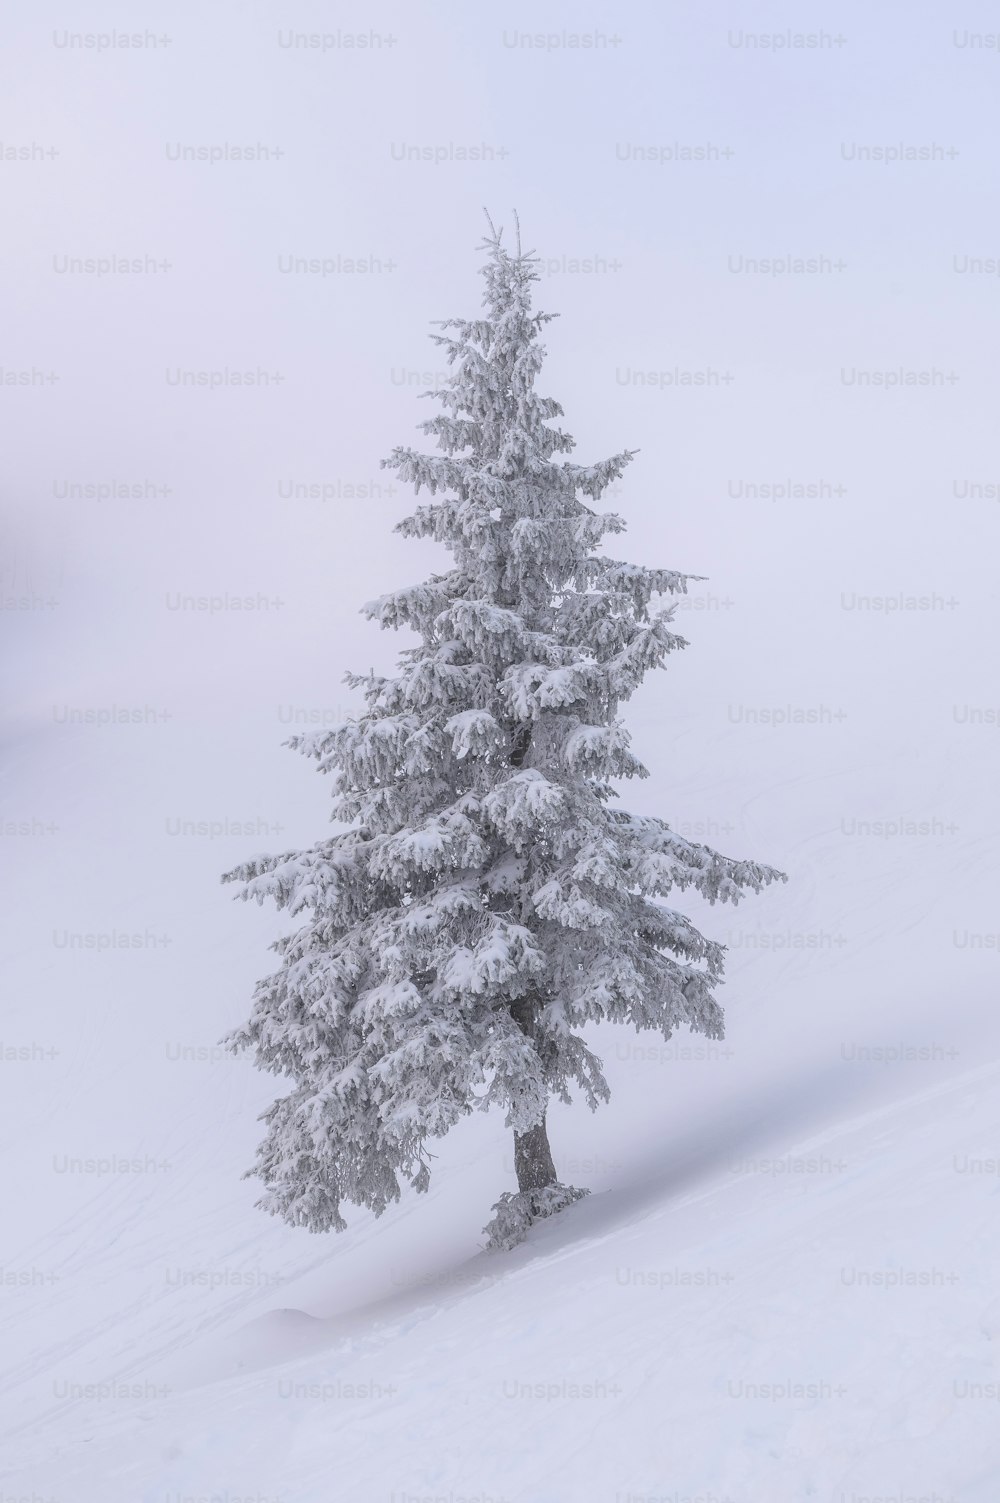 a lone pine tree in the middle of a snowy field